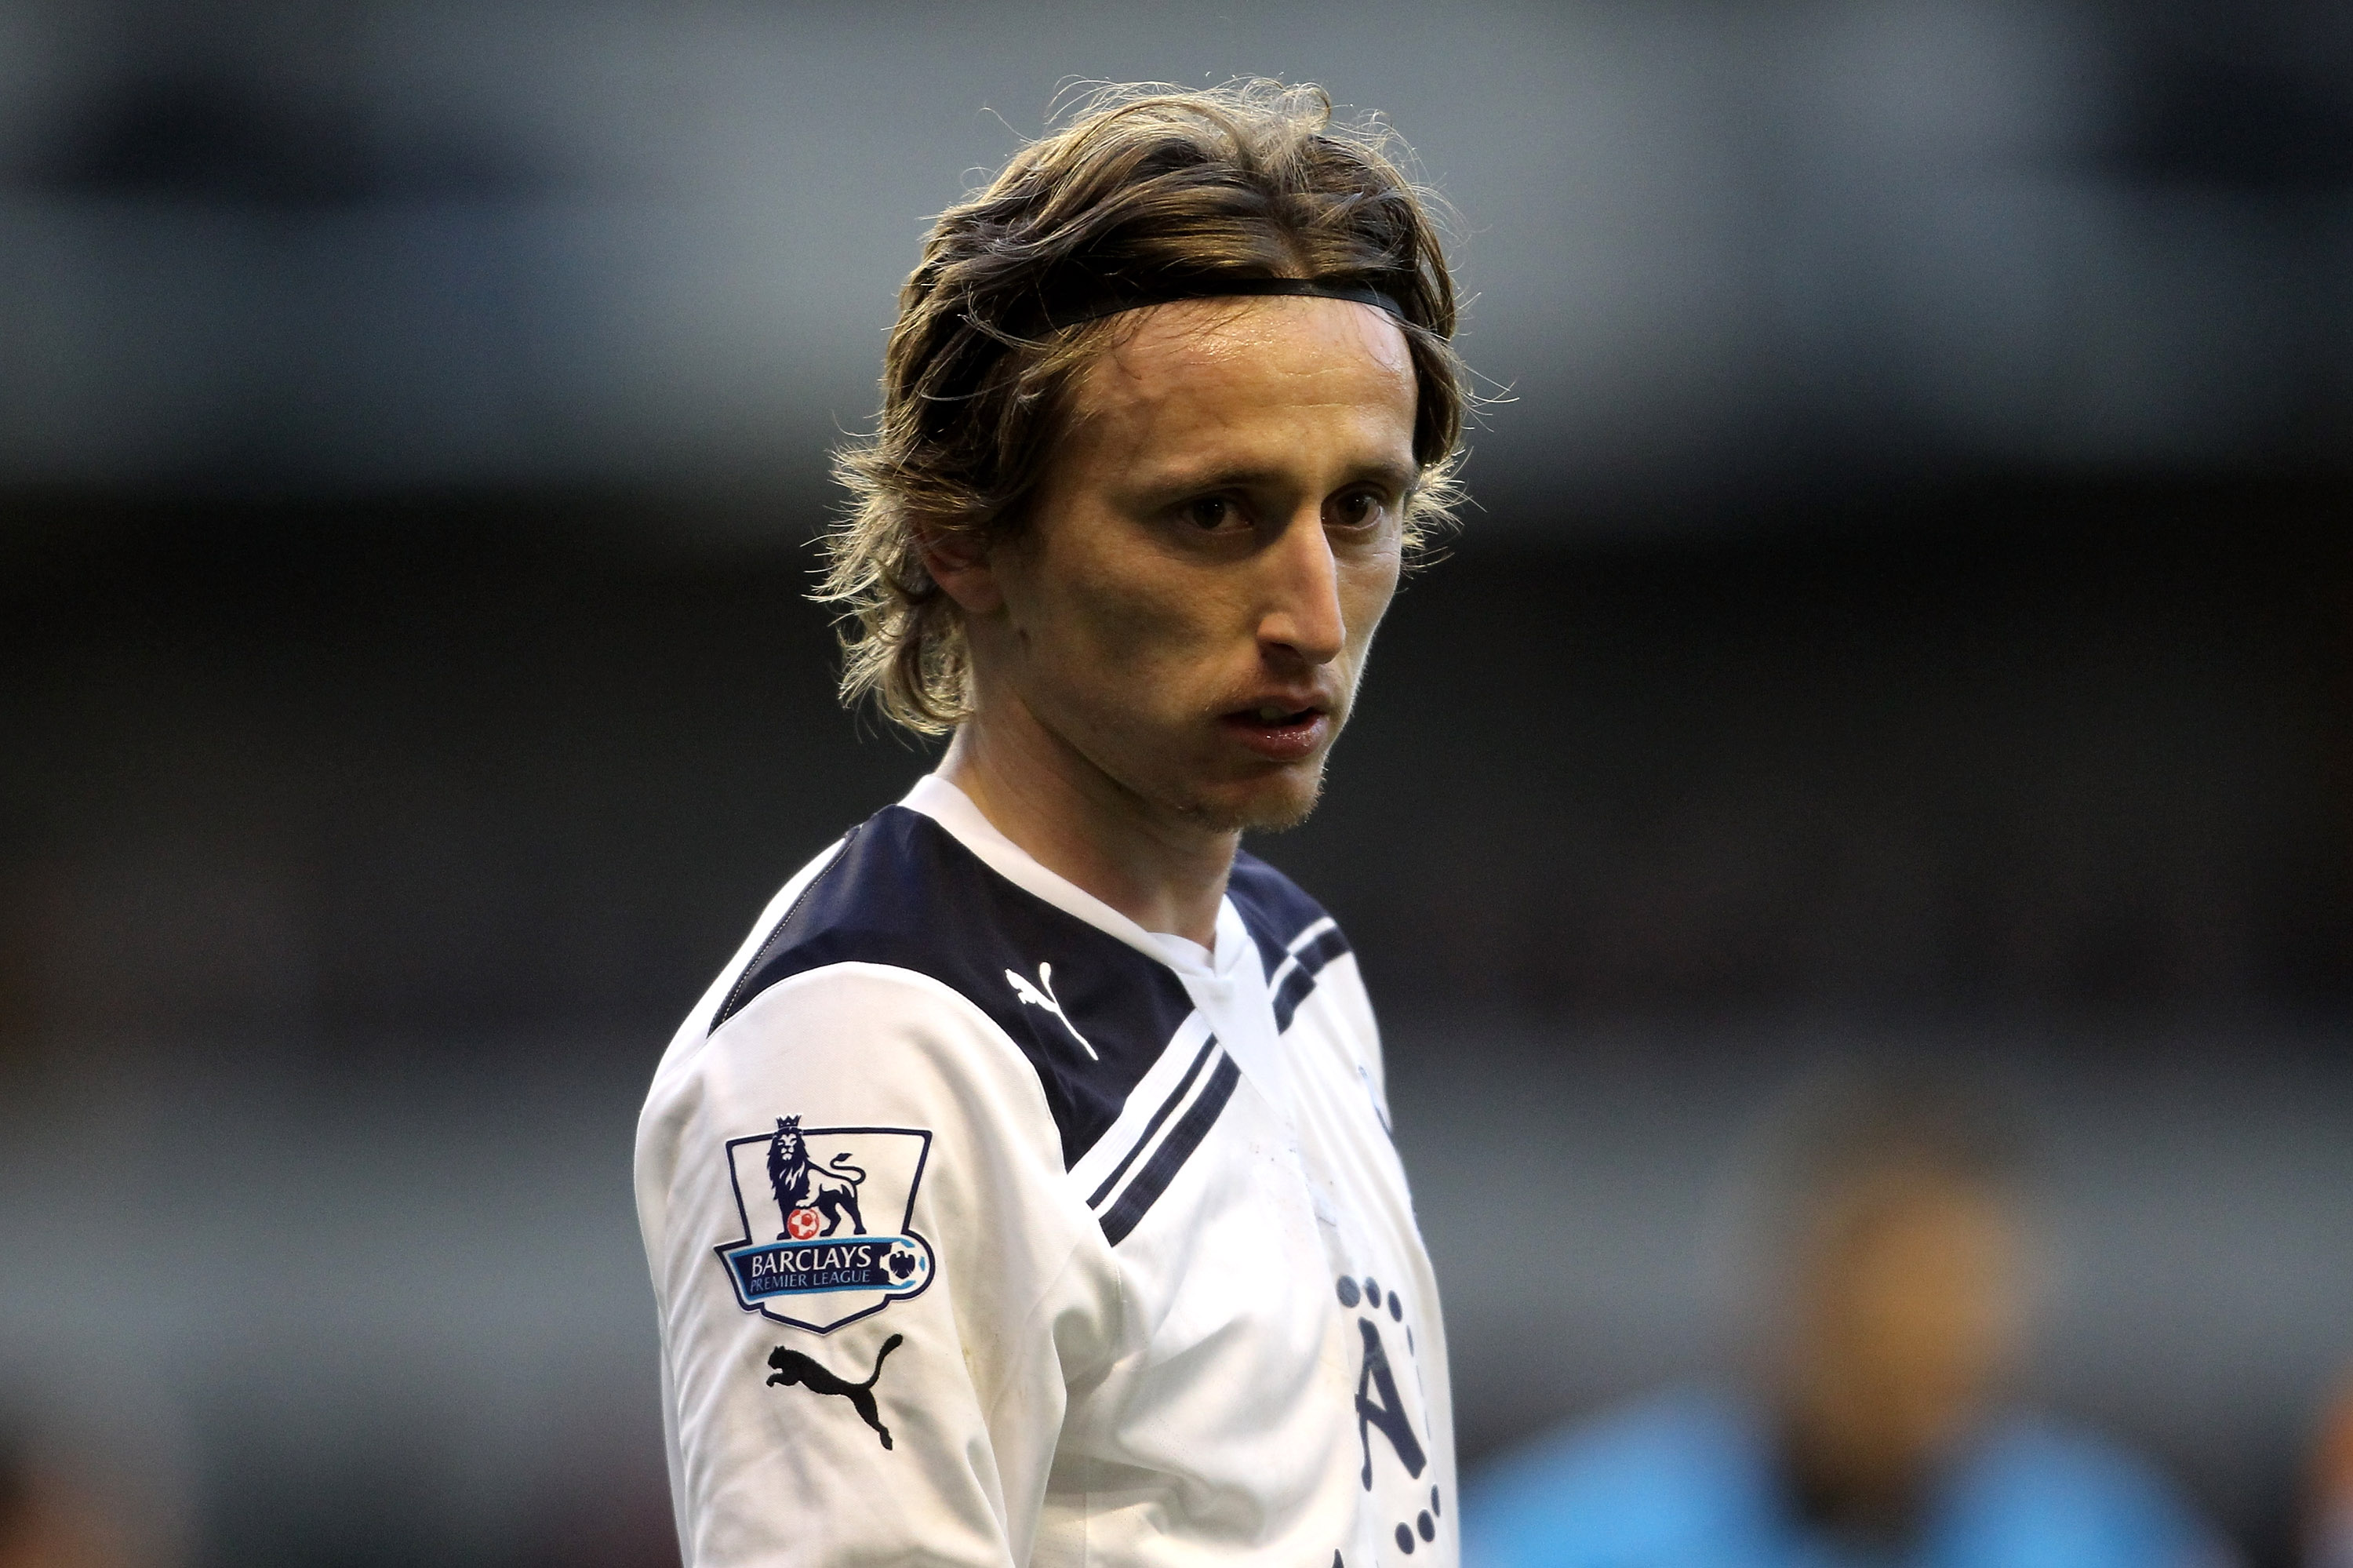 WOLVERHAMPTON, ENGLAND - MARCH 06:  Luka Modric of Tottenham looks on during the Barclays Premier League match between Wolverhampton Wanderers and Tottenham Hotspur at Molineux on March 6, 2011 in Wolverhampton, England.  (Photo by Scott Heavey/Getty Imag